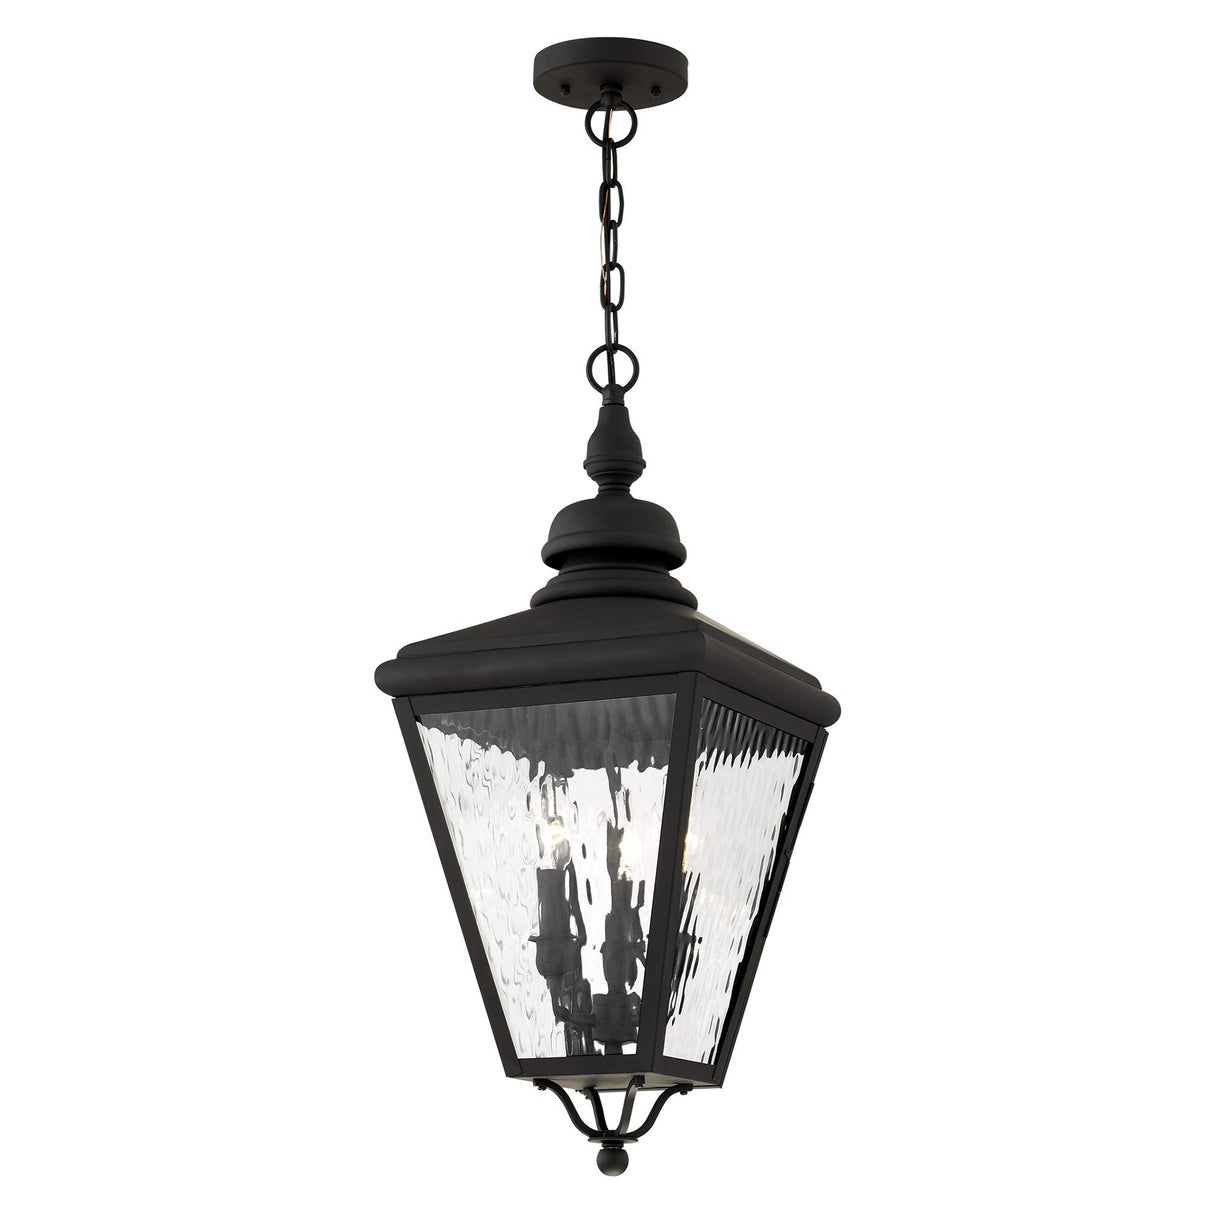 Livex 2035-04 Transitional Three Light Outdoor Pendant from Cambridge Collection in Black Finish, 10.63 inches